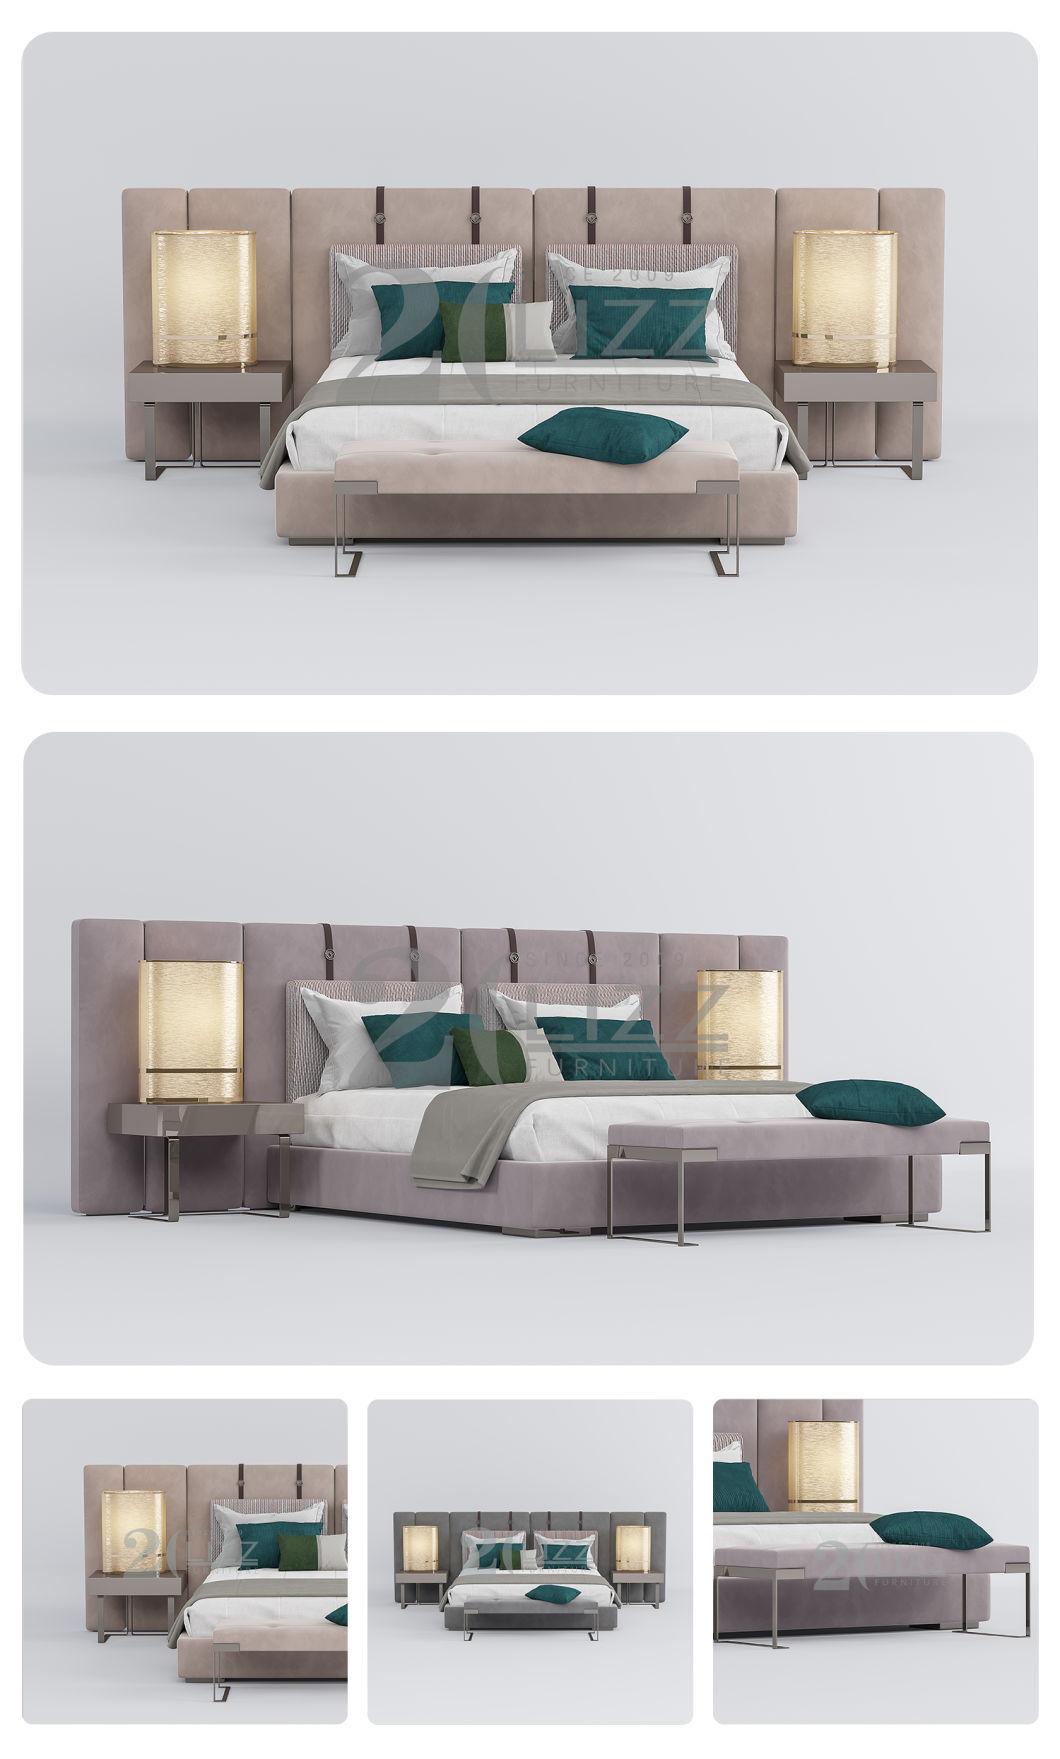 Modern Fabric Large Double King Size Bed with Fabric Long Couch & Big Headboard Bedroom Furniture Set